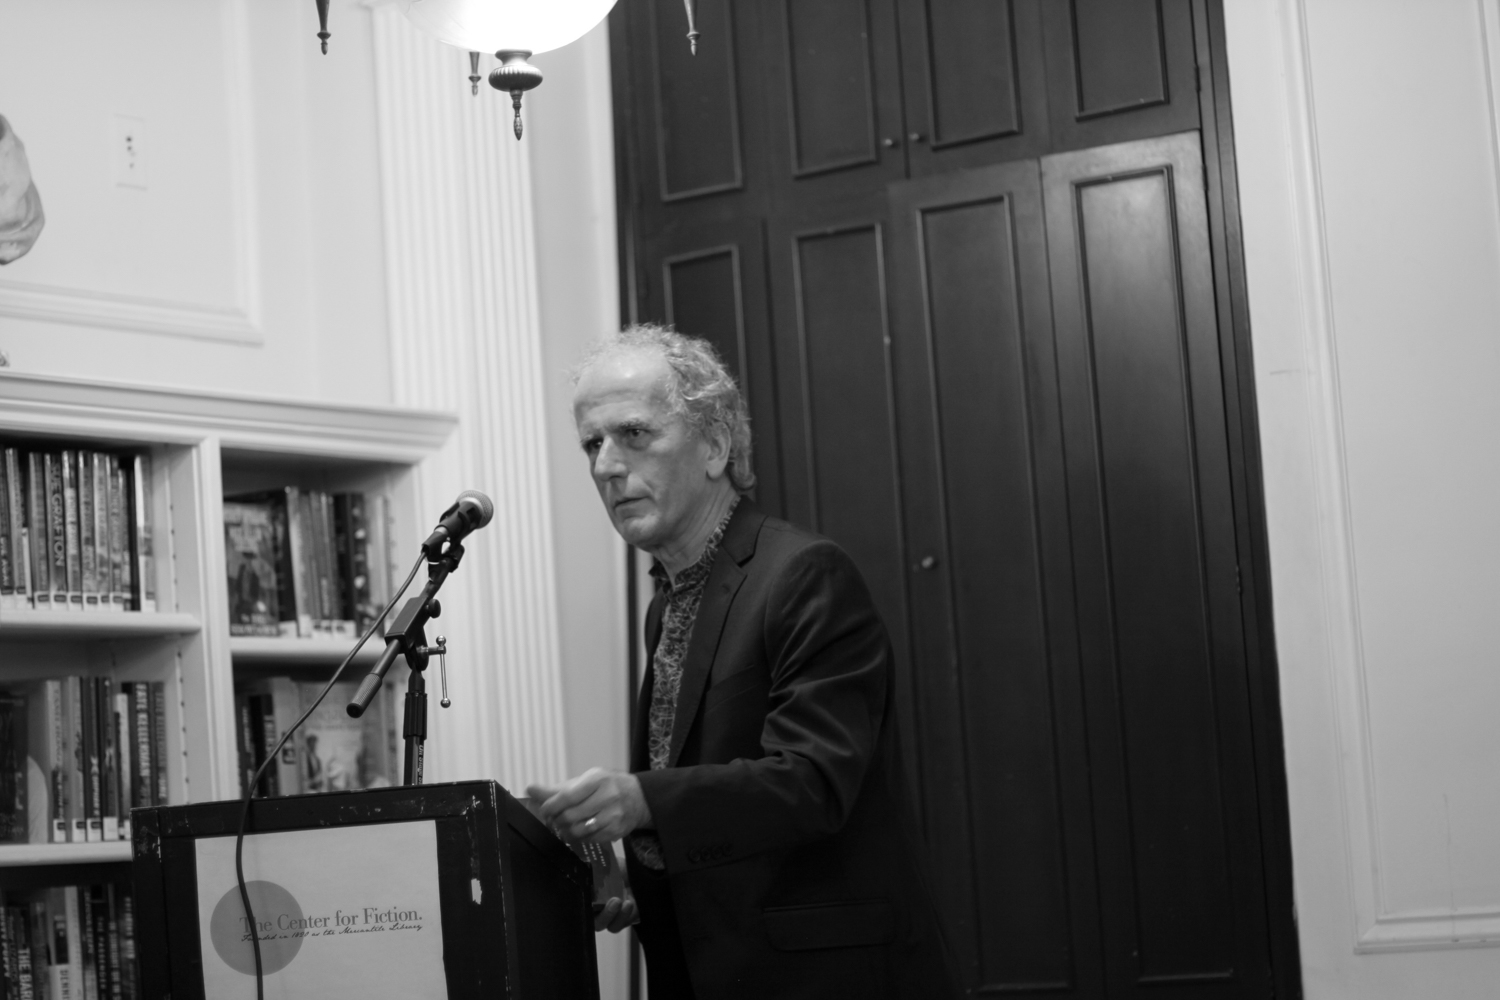  Paul Griffiths reads from work published in  Music &amp; Literature  no. 7 